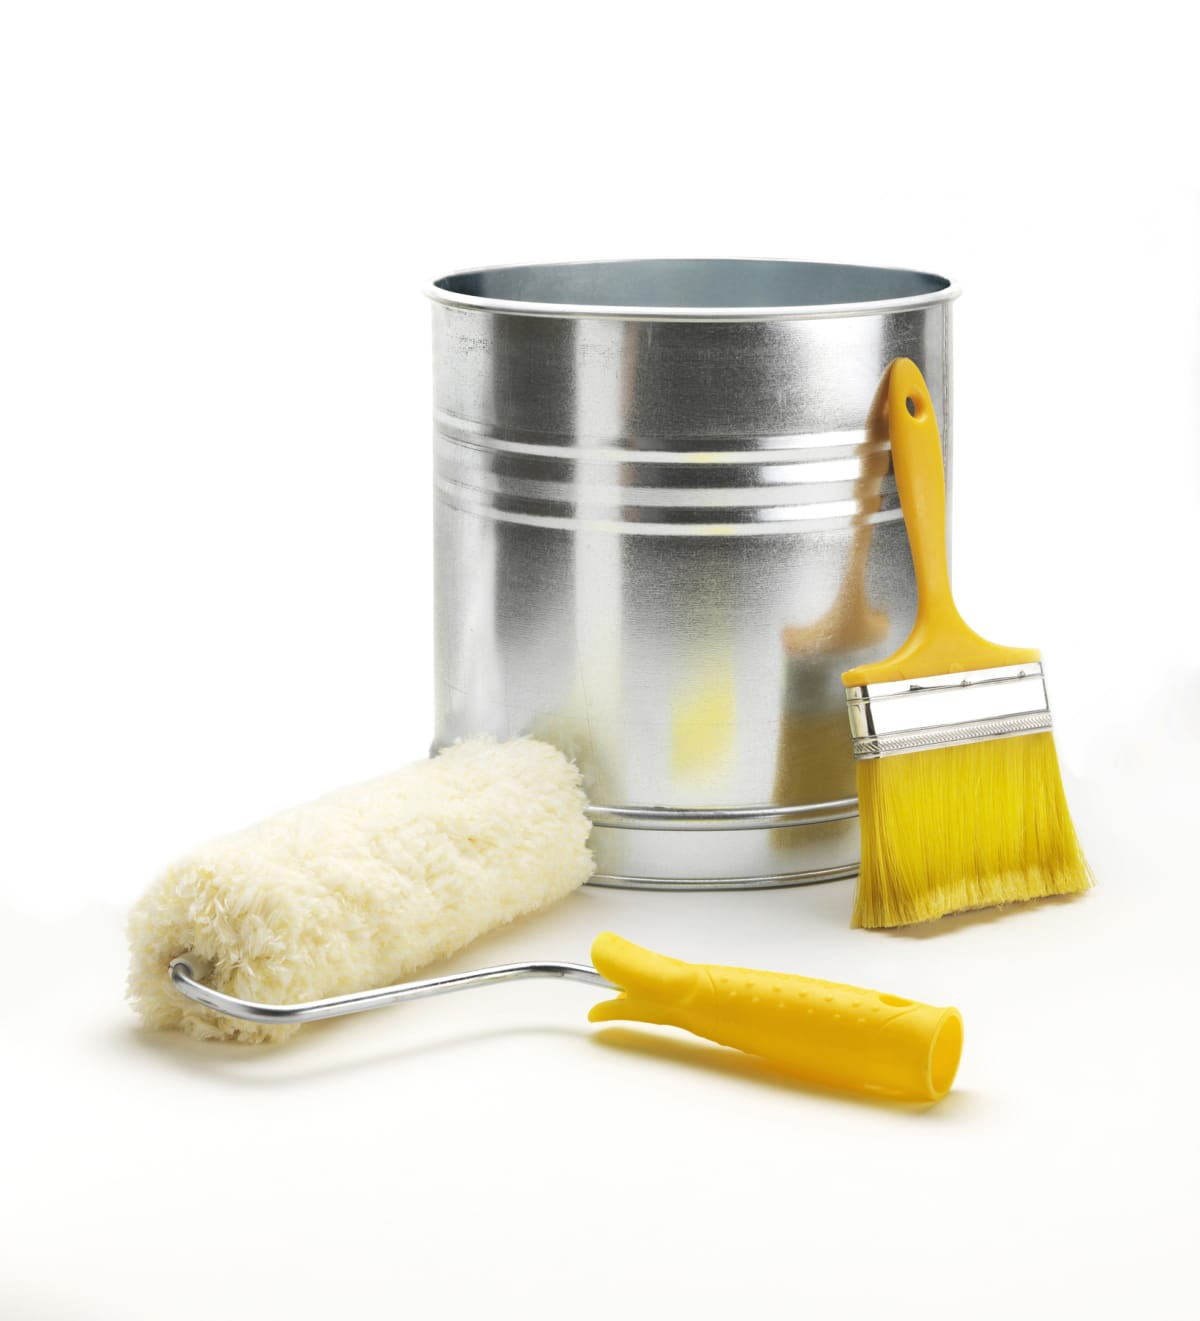 Paint roller, paint brush, and paint bucket on white background